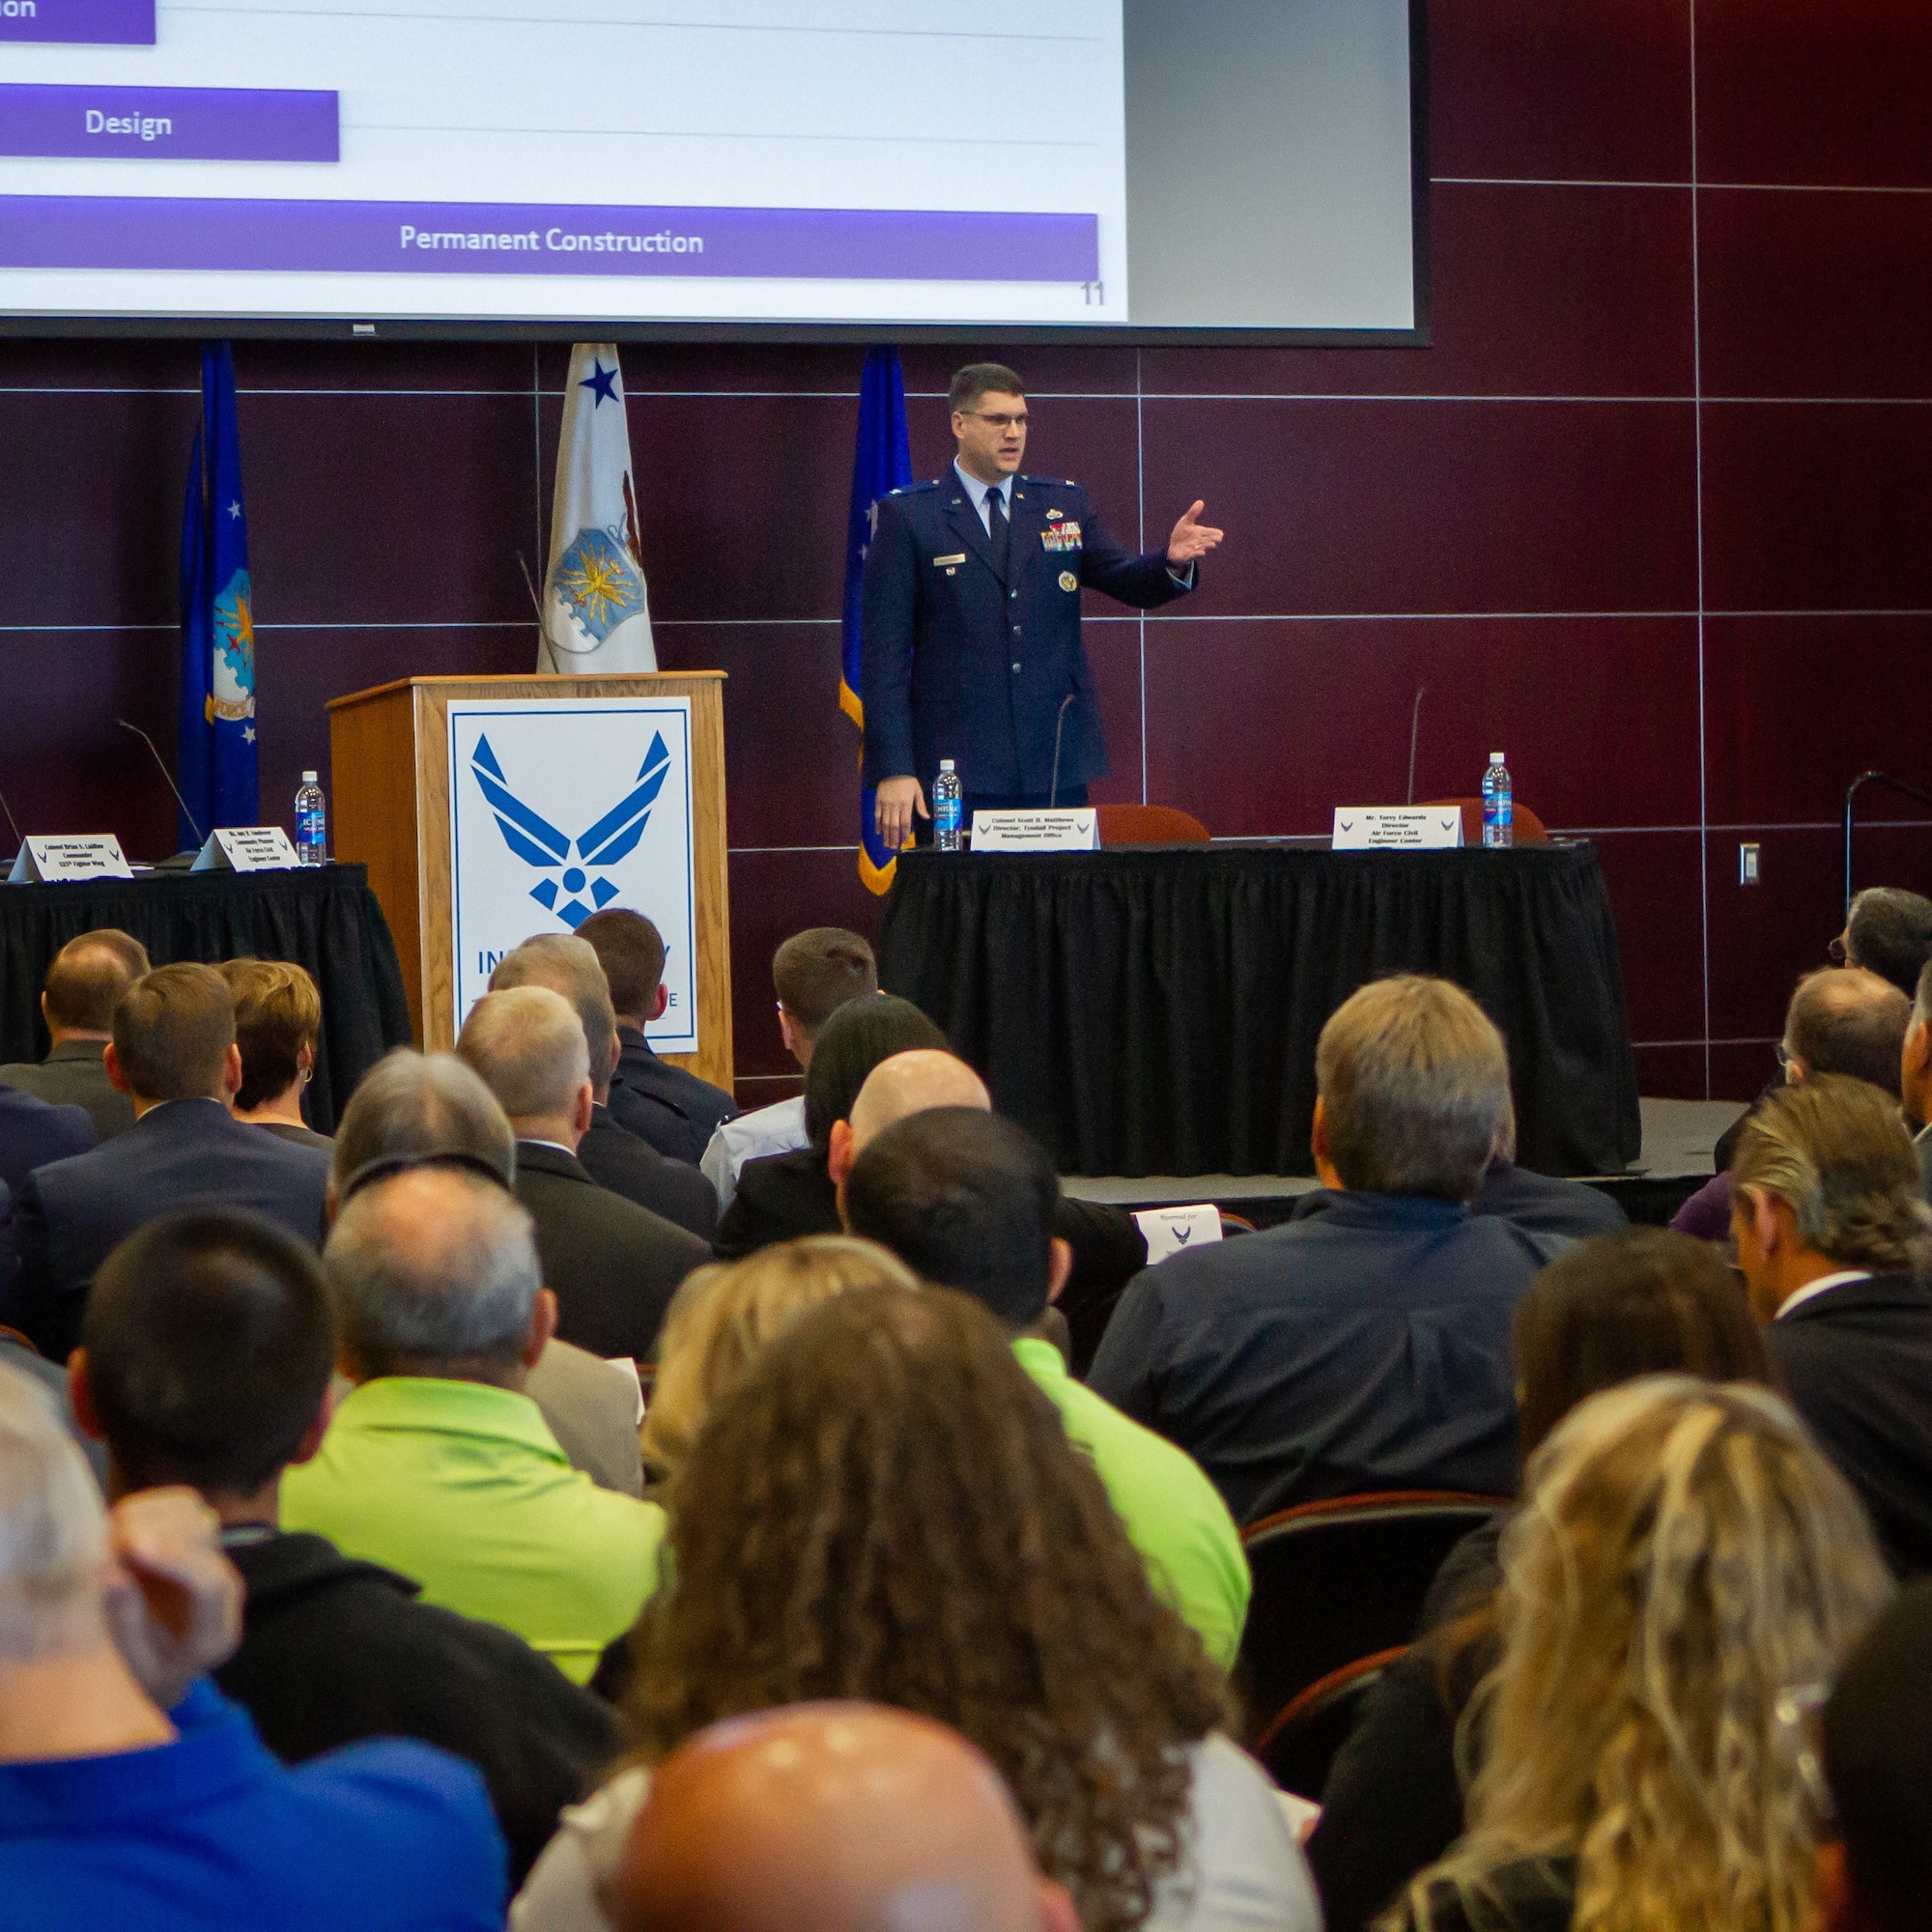 Air Force leaders met with professionals from construction and other industries to begin rebuild of Tyndall AFB.